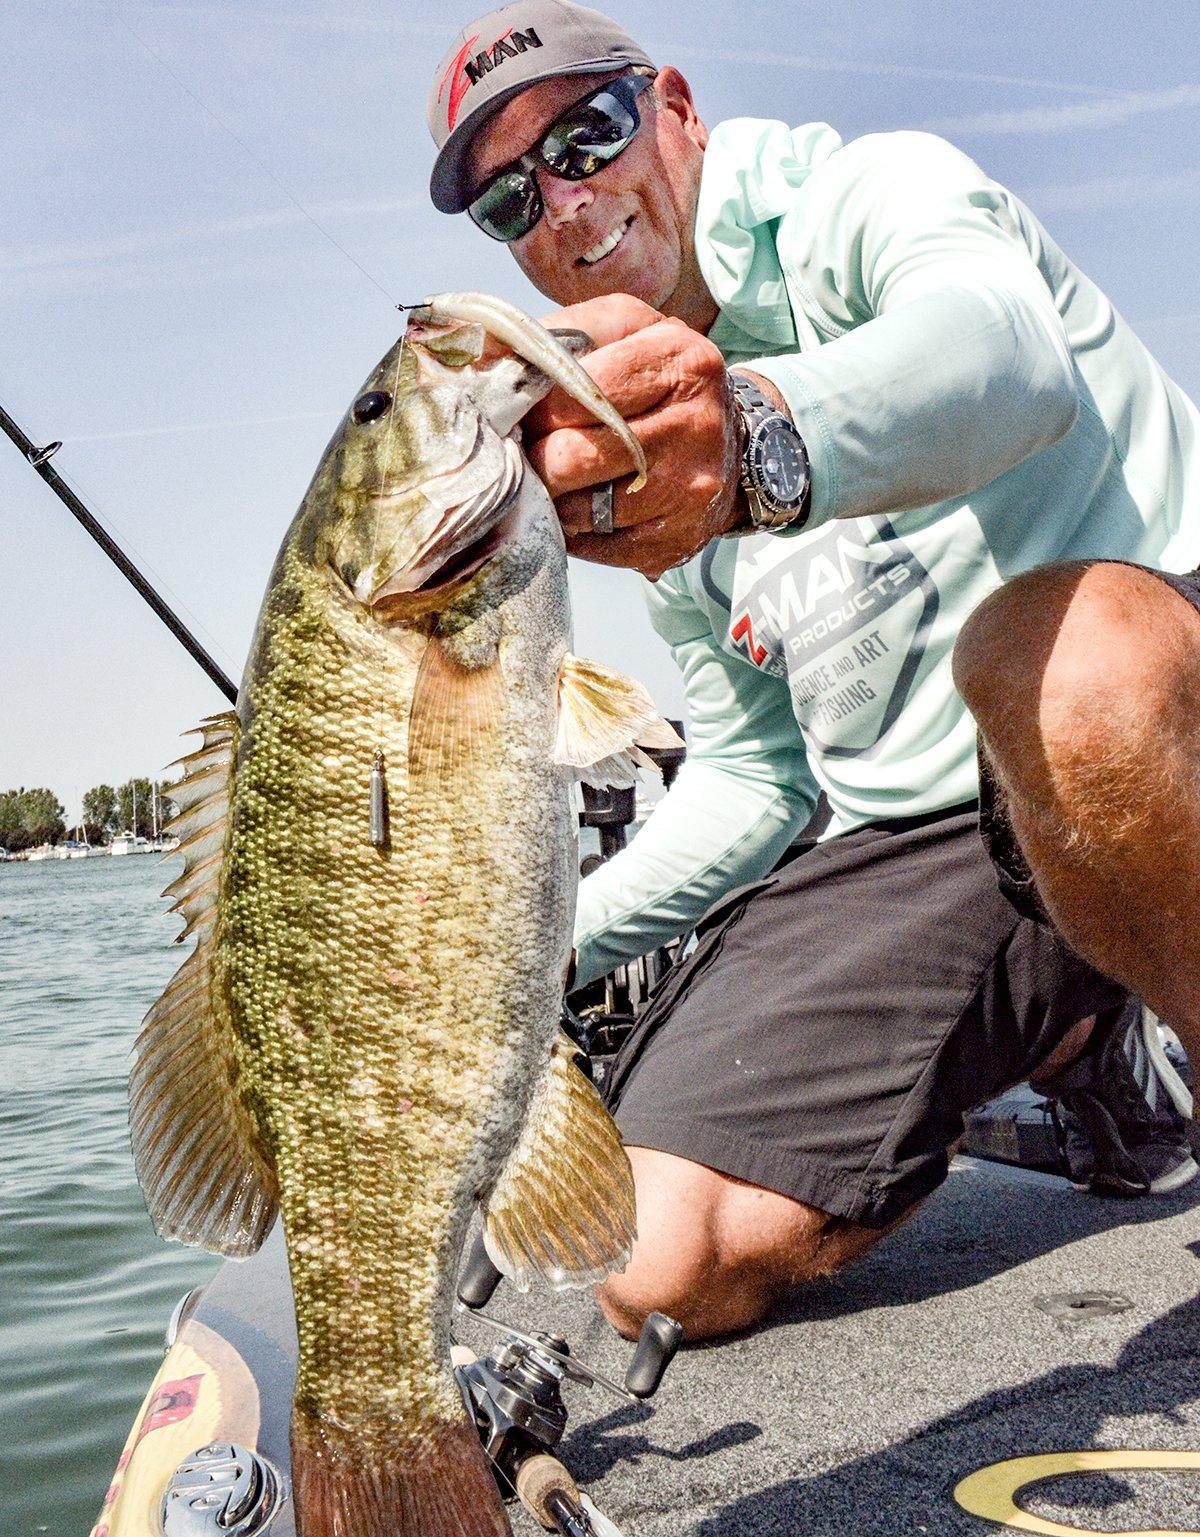 The best smallmouth fishing in the world happens on the Great Lakes. Image by Millennium Promotions